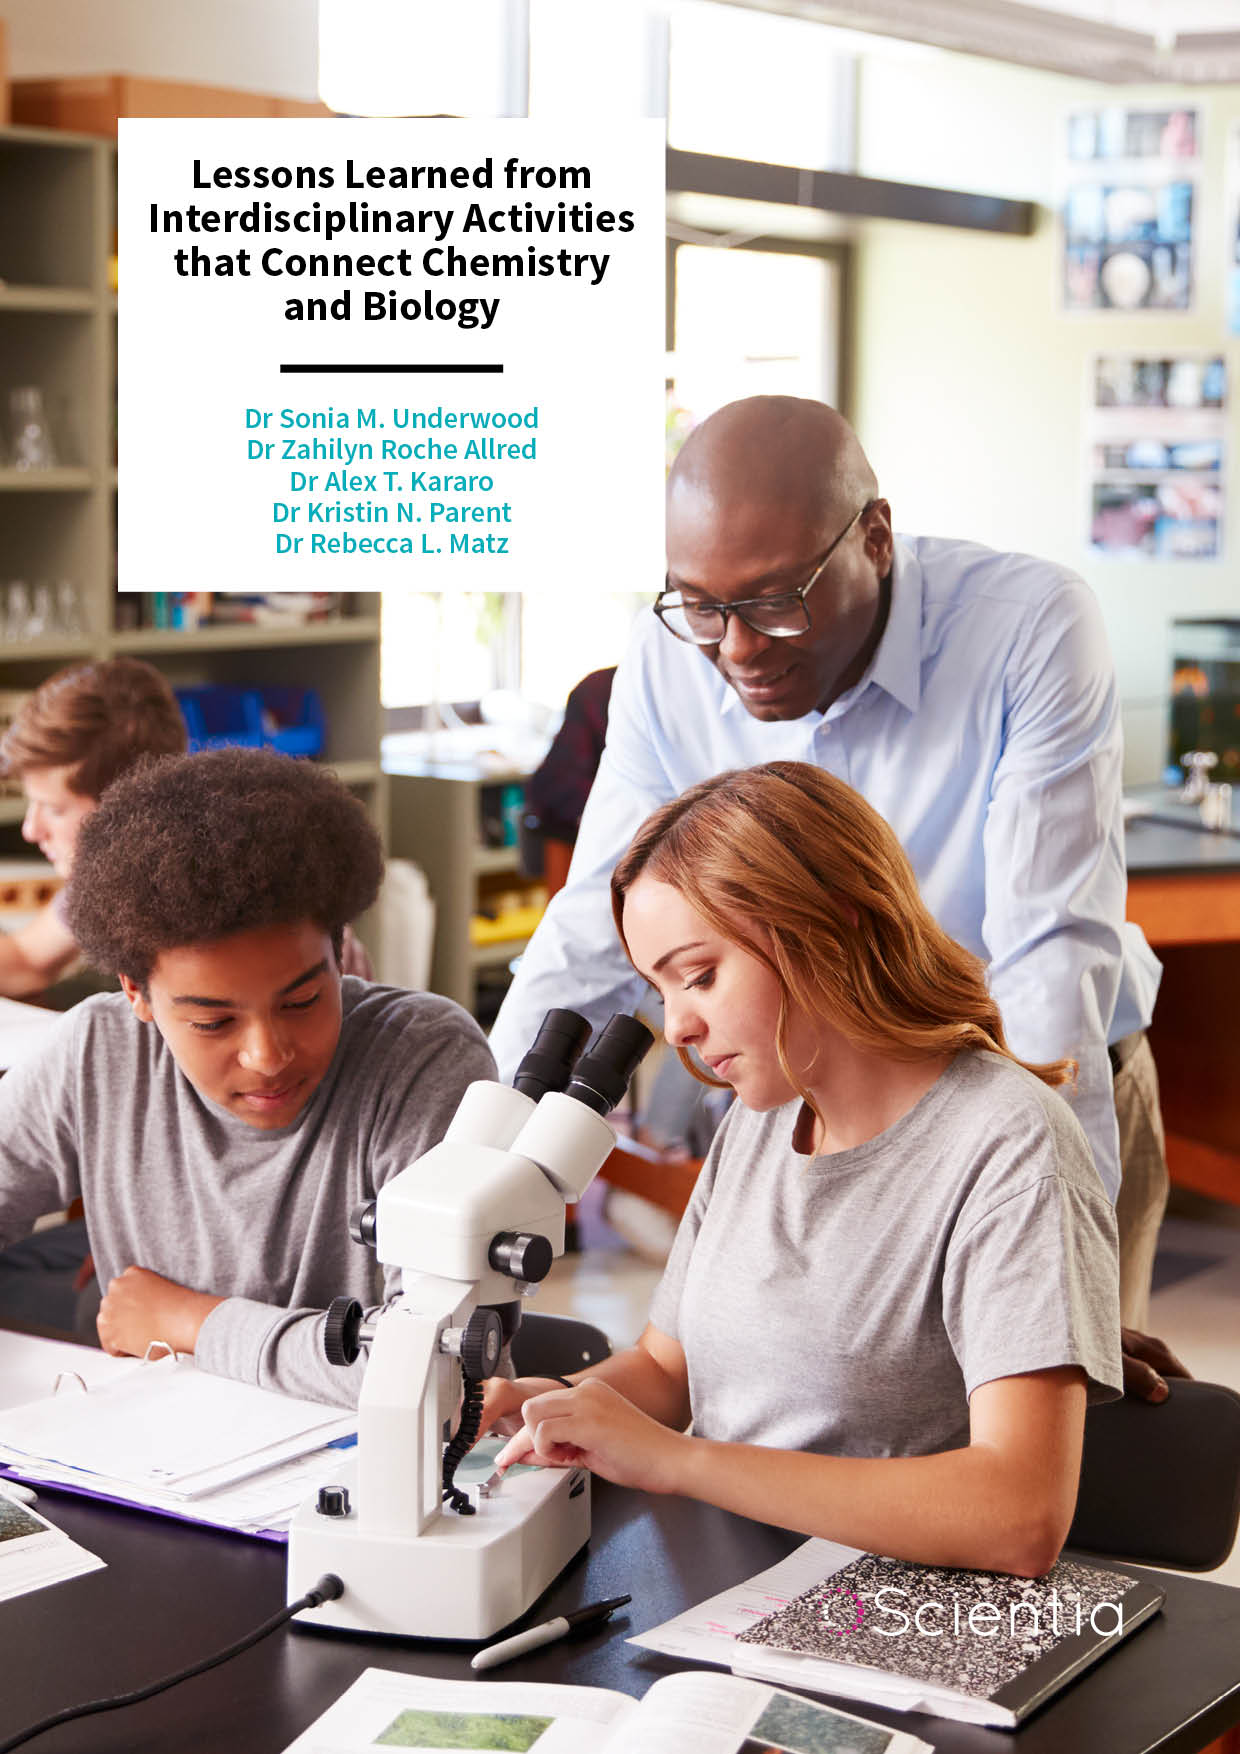 Lessons Learned from Interdisciplinary Activities that Connect Chemistry and Biology